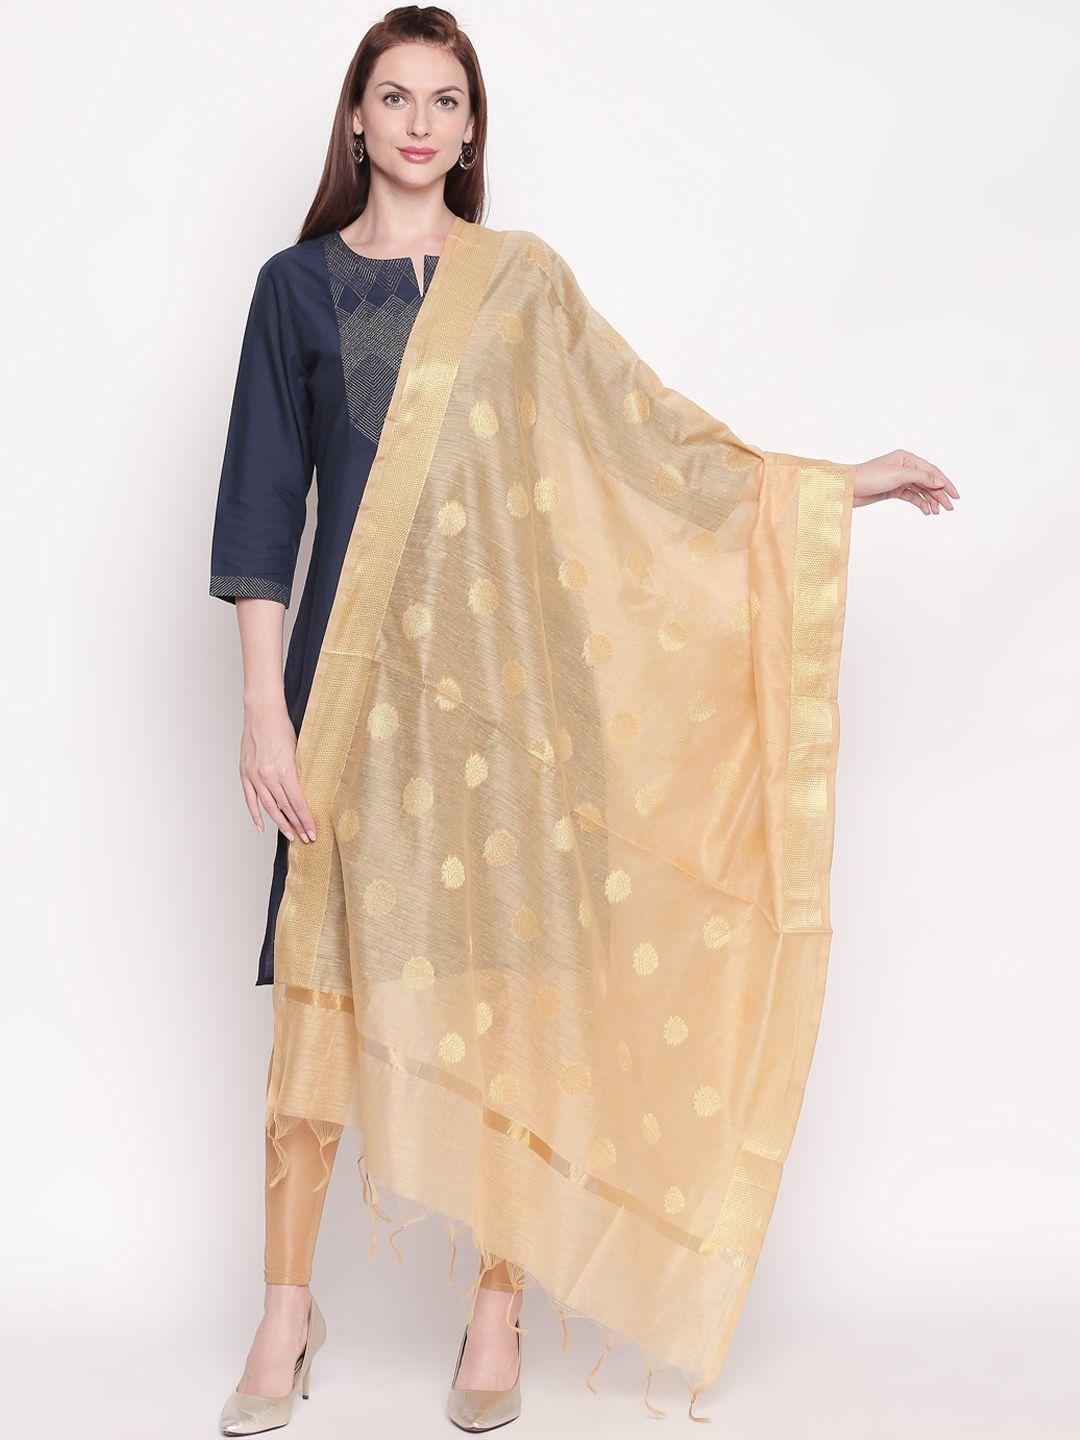 rangmanch-by-pantaloons-gold-coloured-embroidered-dupatta